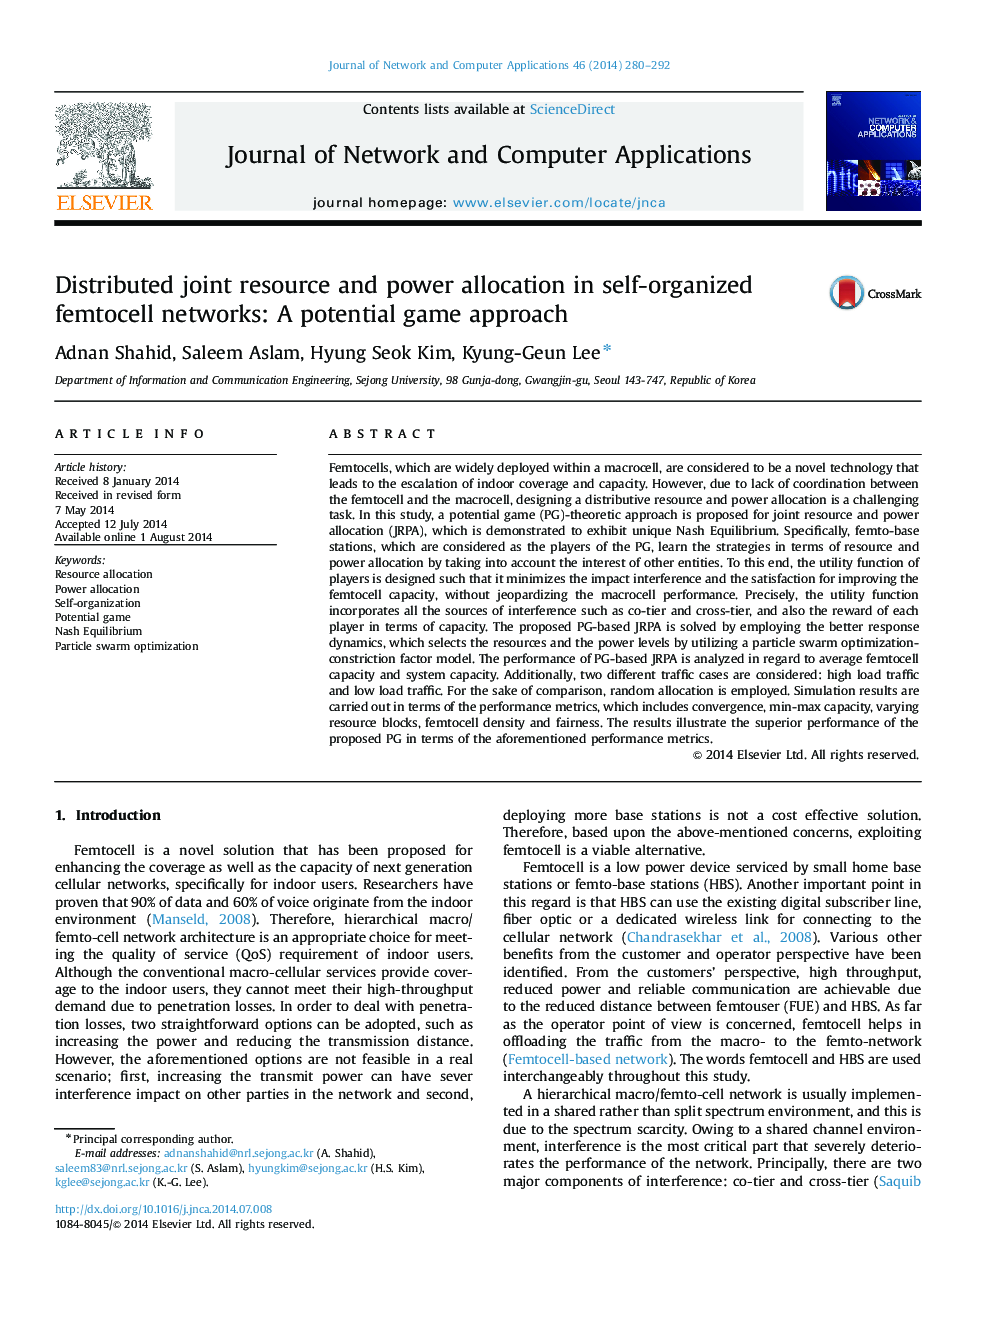 Distributed joint resource and power allocation in self-organized femtocell networks: A potential game approach